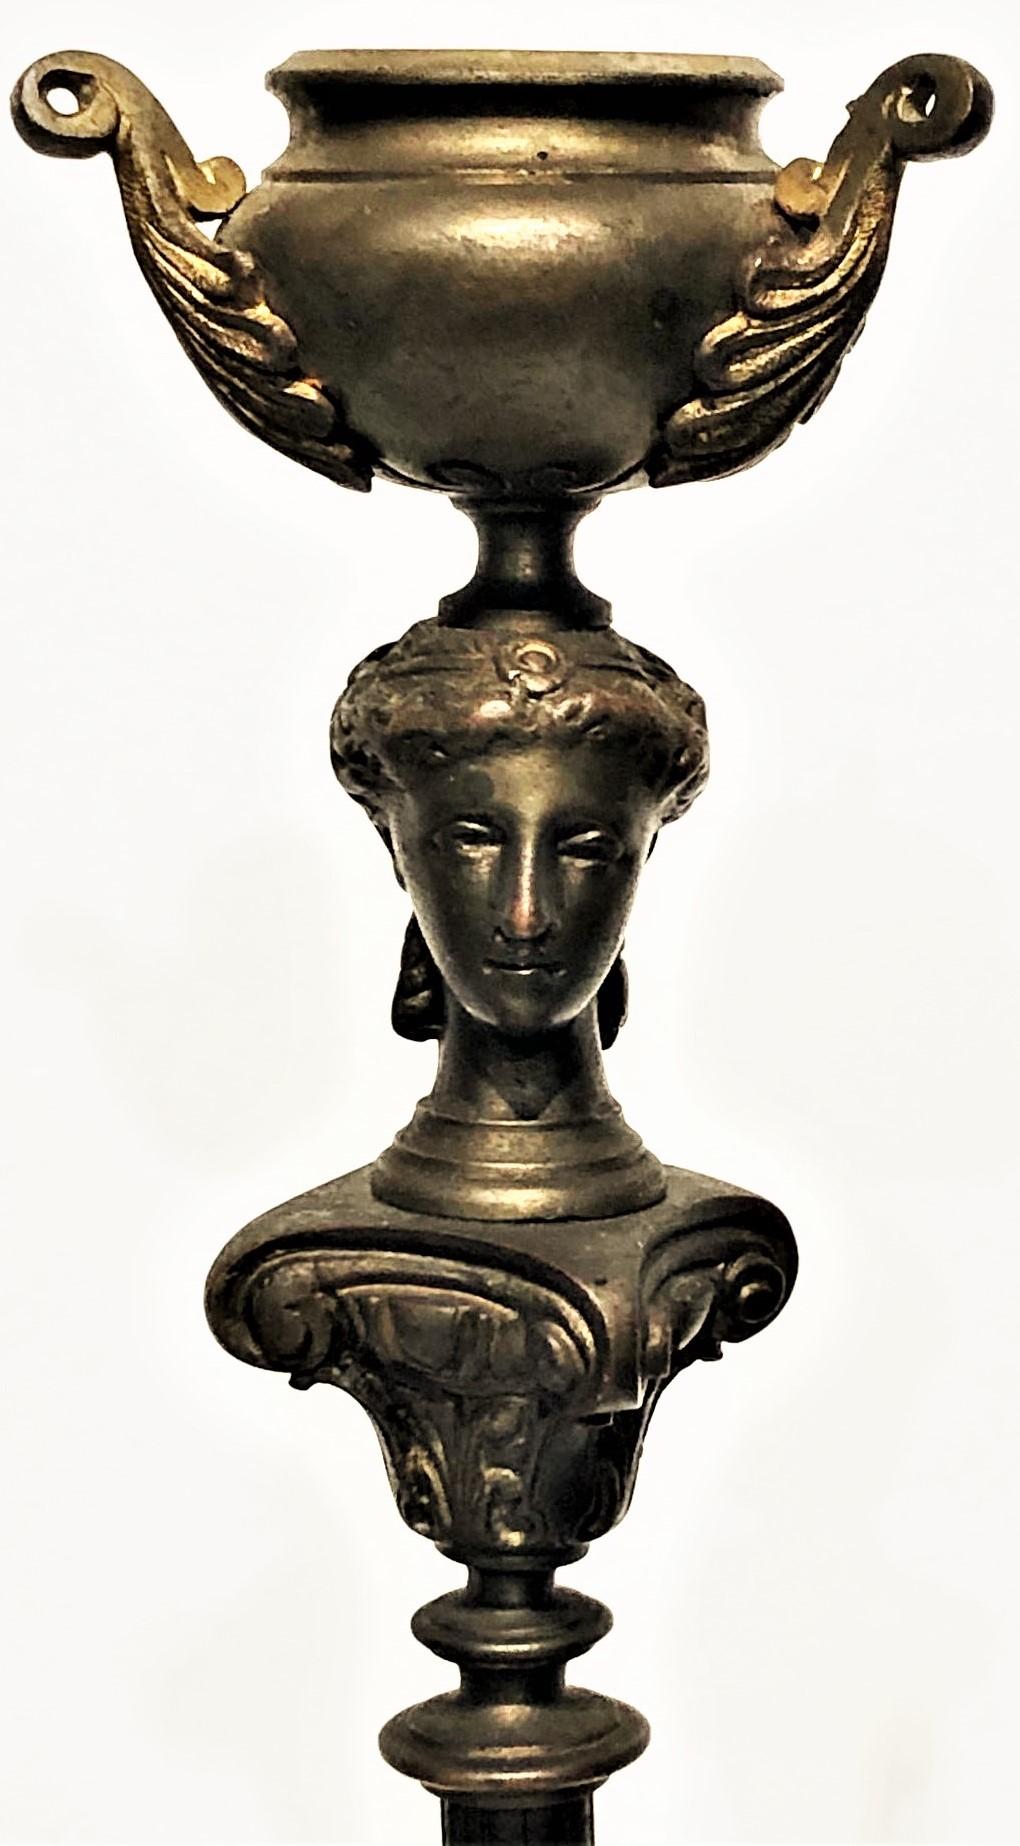 Grand Tour 
Pair of Bronze Candelabras
Late 19th Century

DIMENSIONS
Height: 10.33 inches
Width: 4.75 inches
Depth: 4.75 inches

ABOUT
We present to your attention a pair of stunning table candlesticks in the neo-classical Grand Tour style. They are